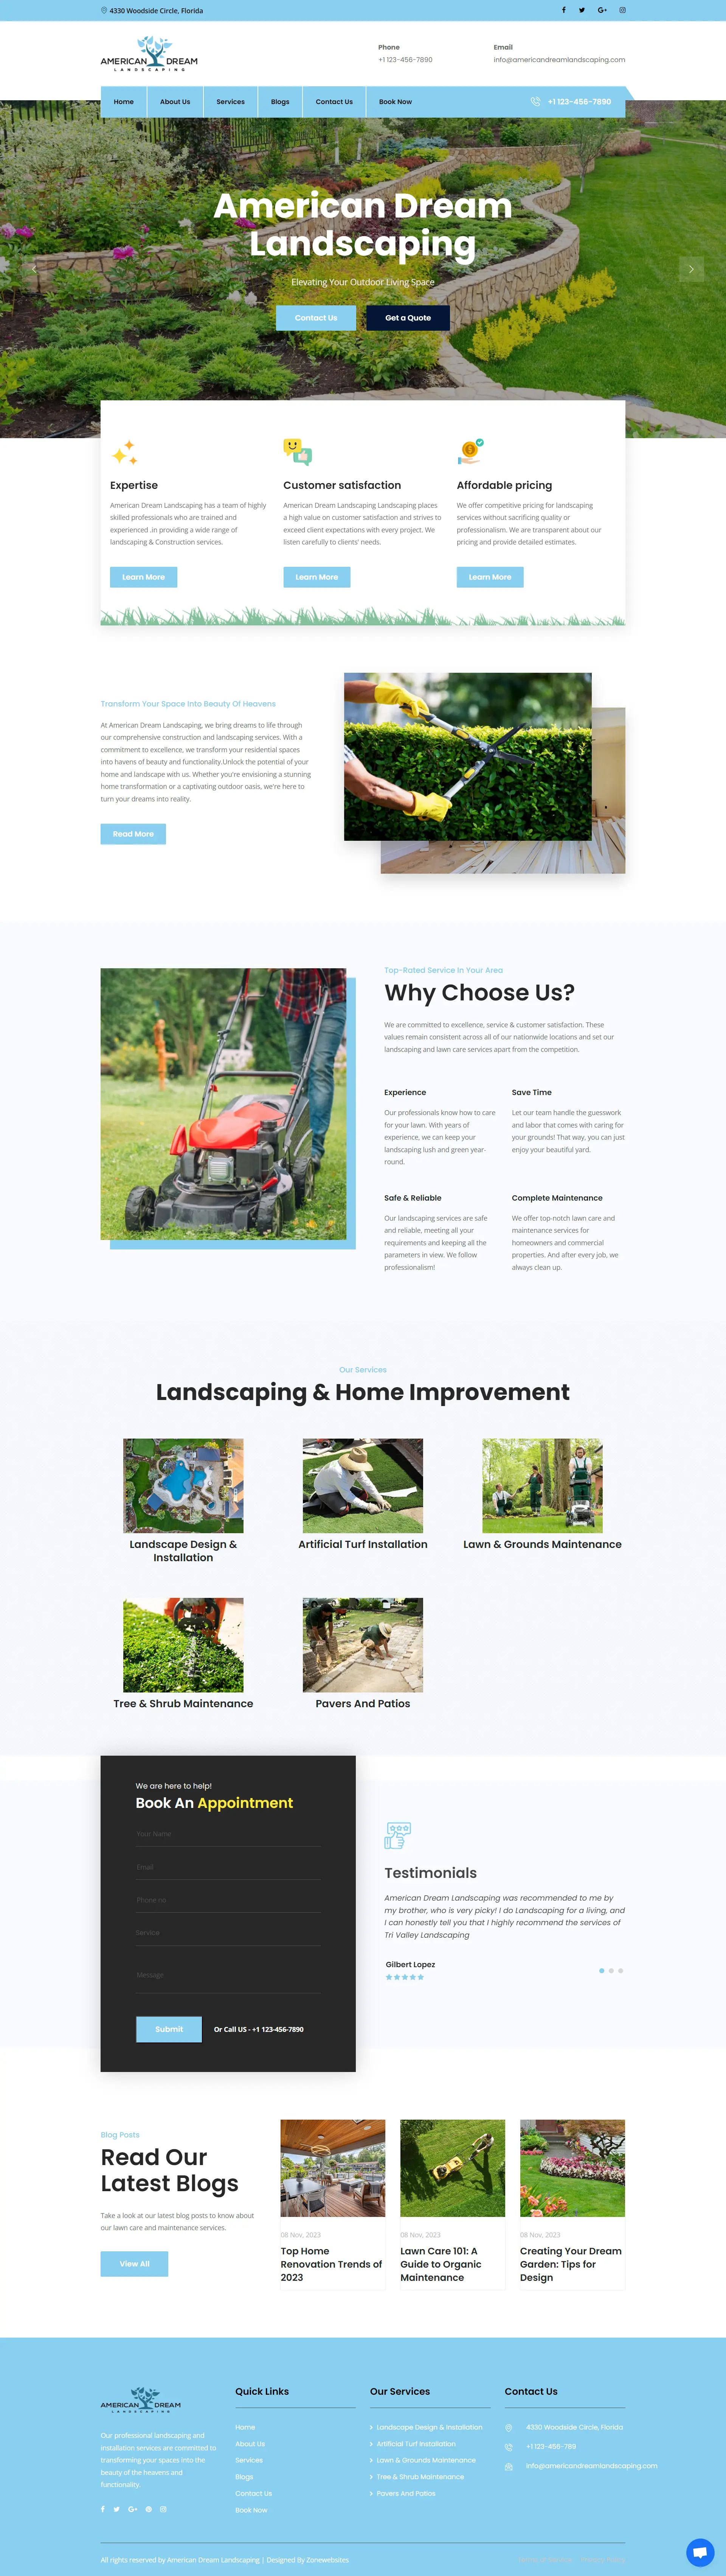 Landscaping and Home Improvement Website Layout